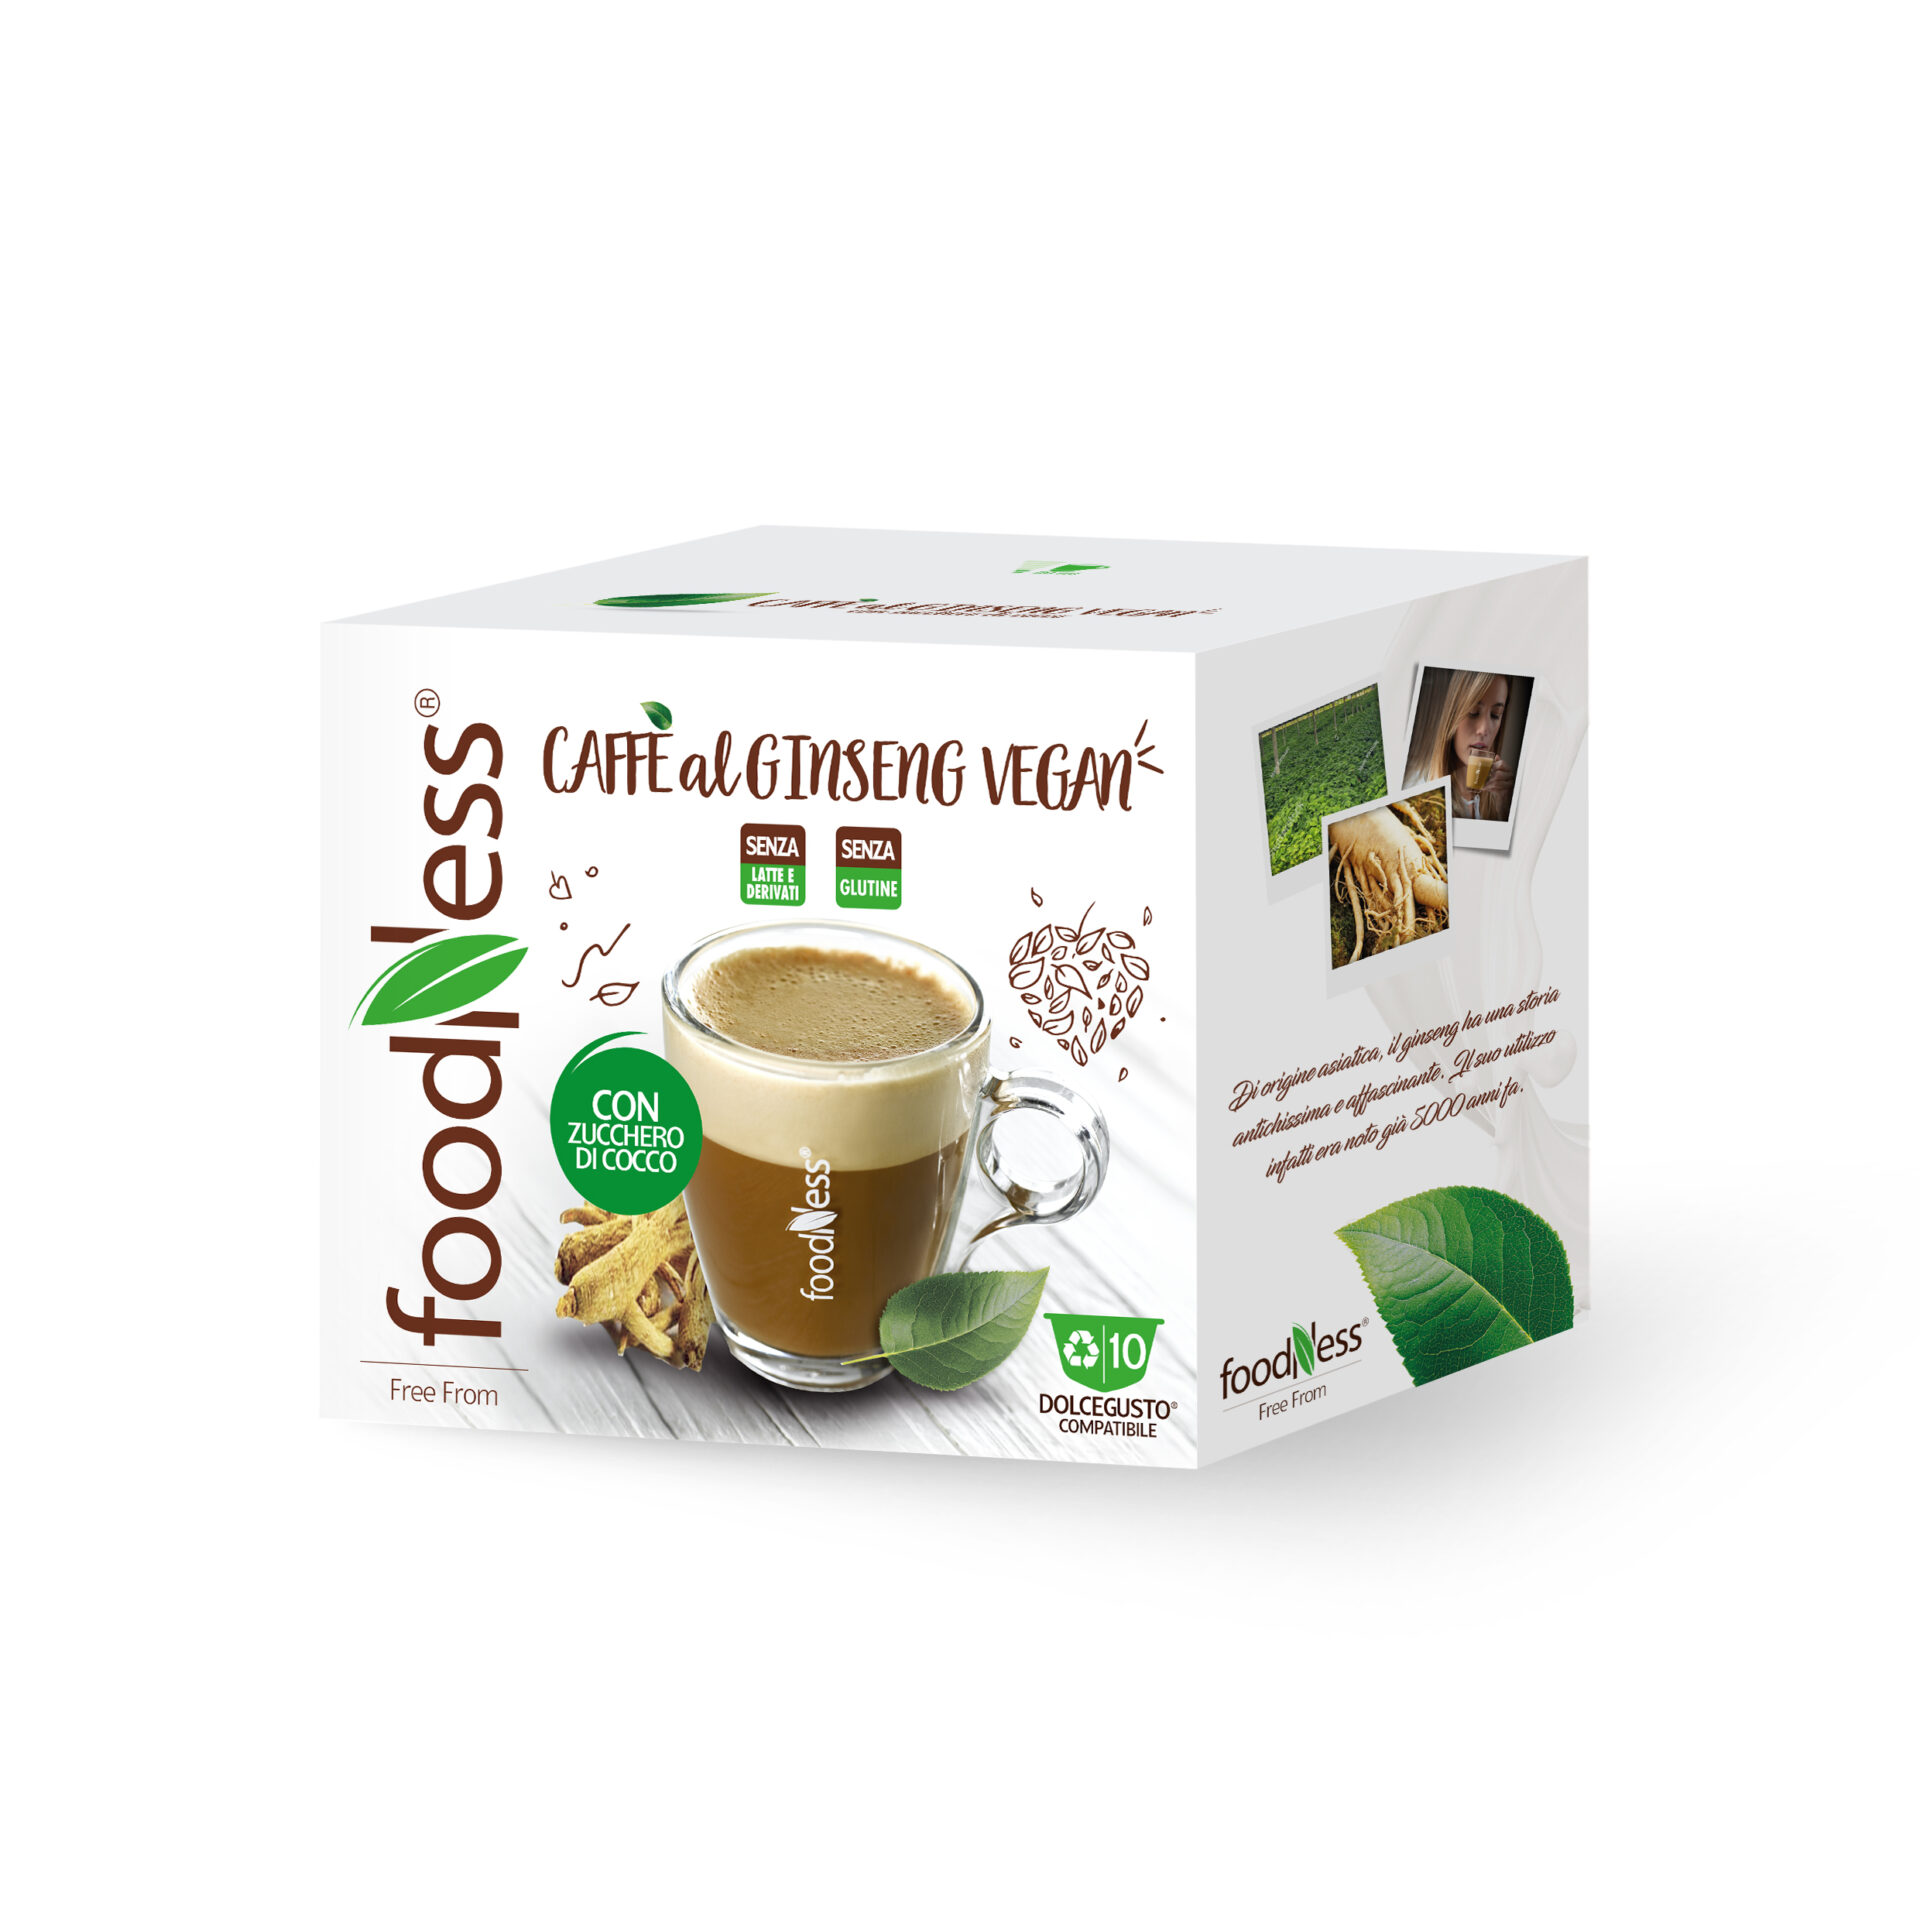 FOODNESS 10 capsule Dolce Gusto* GINSENG VEGAN –